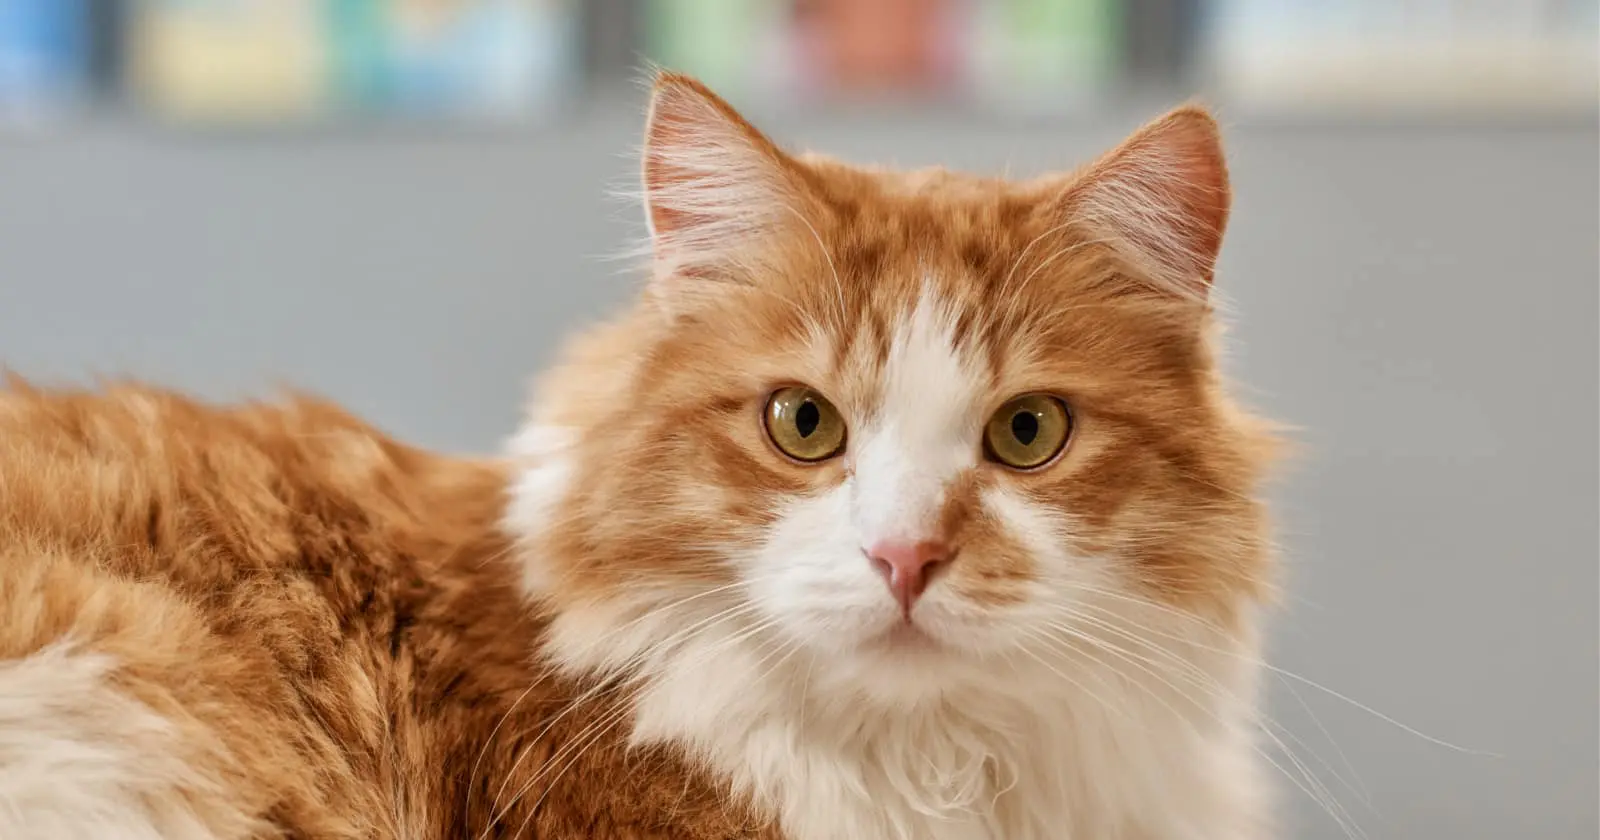 100 Orange And White Cat Names For Your Sweet New Tabby